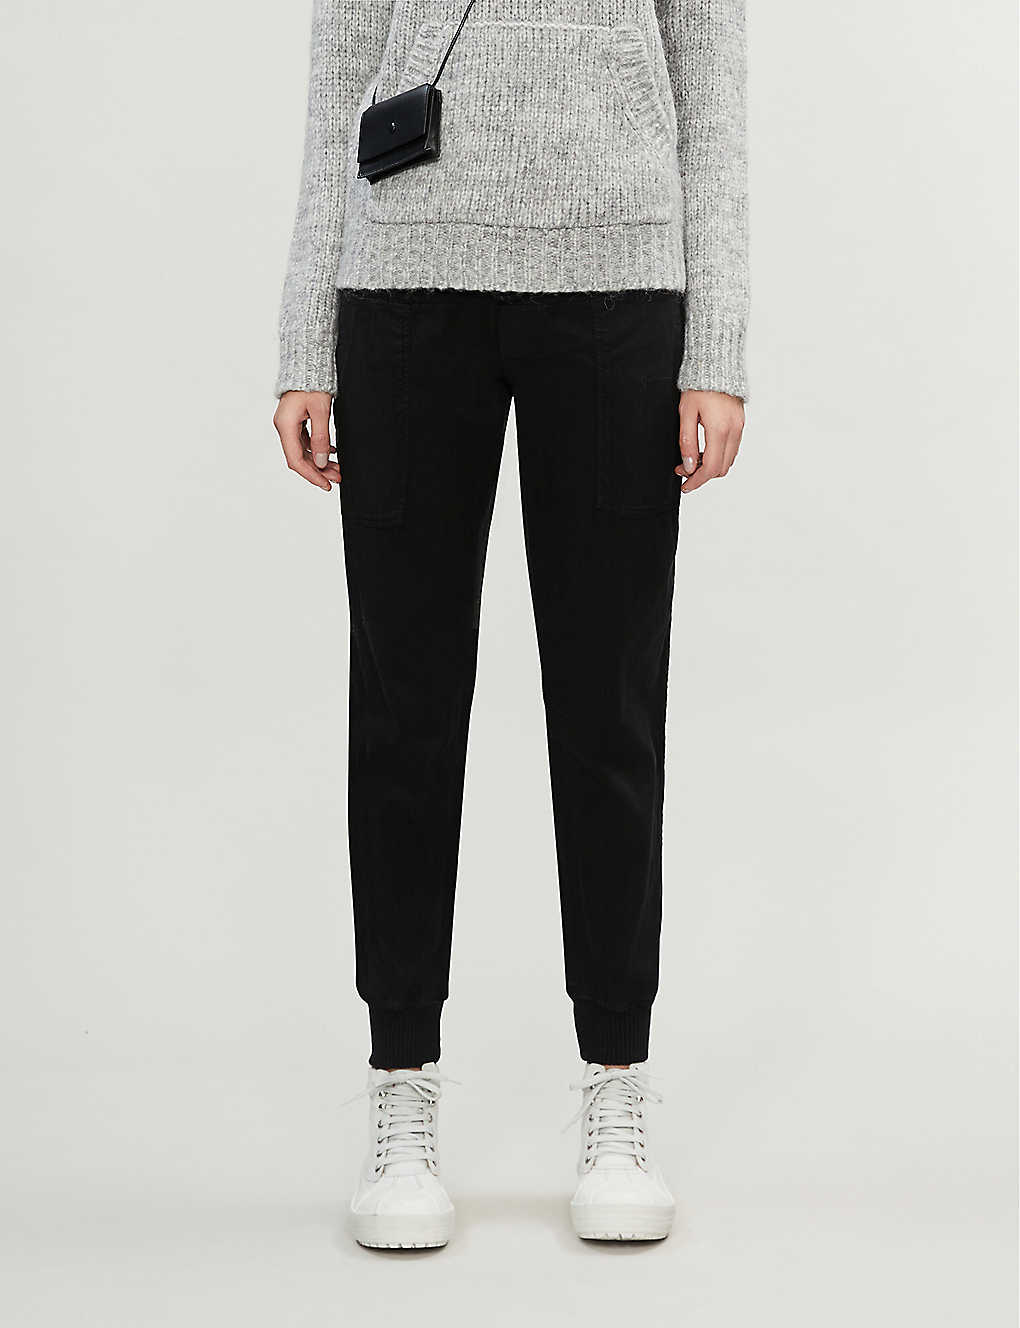 James Perse Faded Cotton Jogging Bottoms In Black